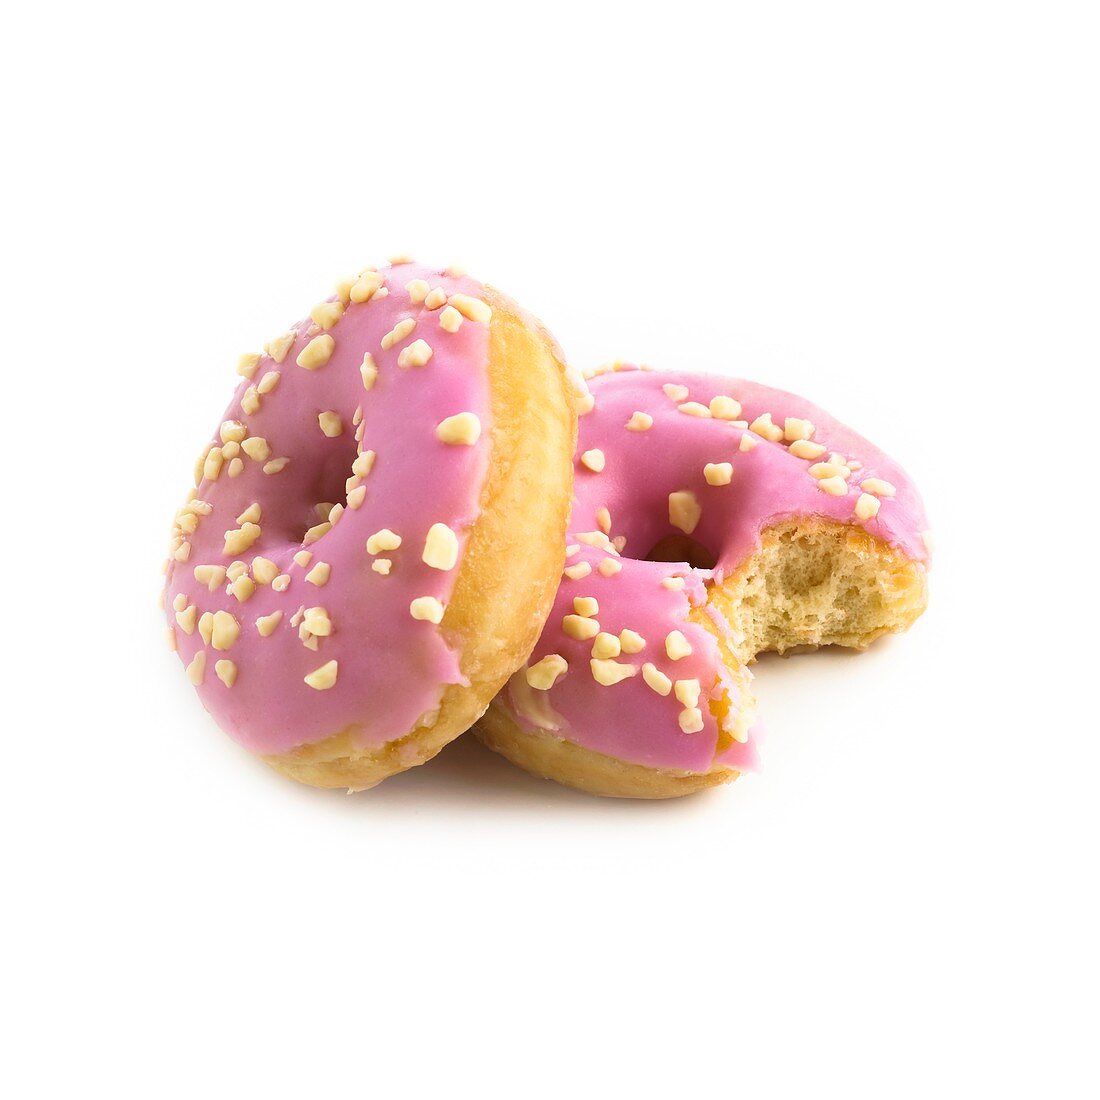 Pink doughnuts,one with a missing bite